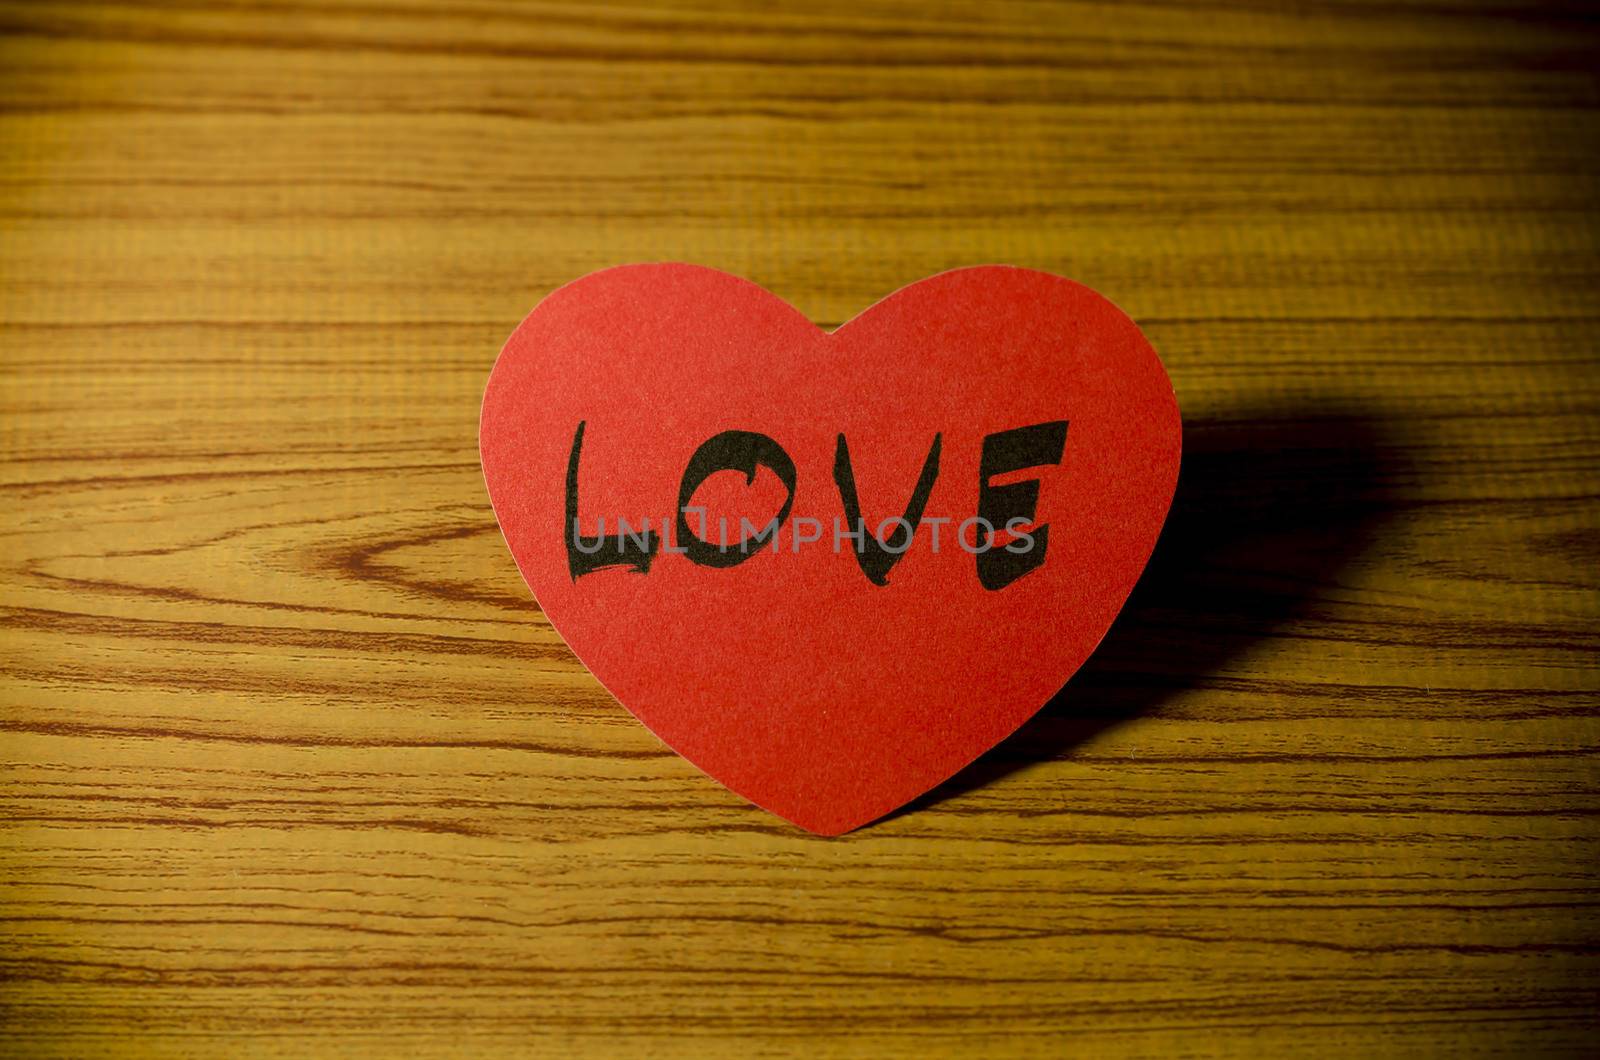 red heart word LOVE on wood vintage stlye background